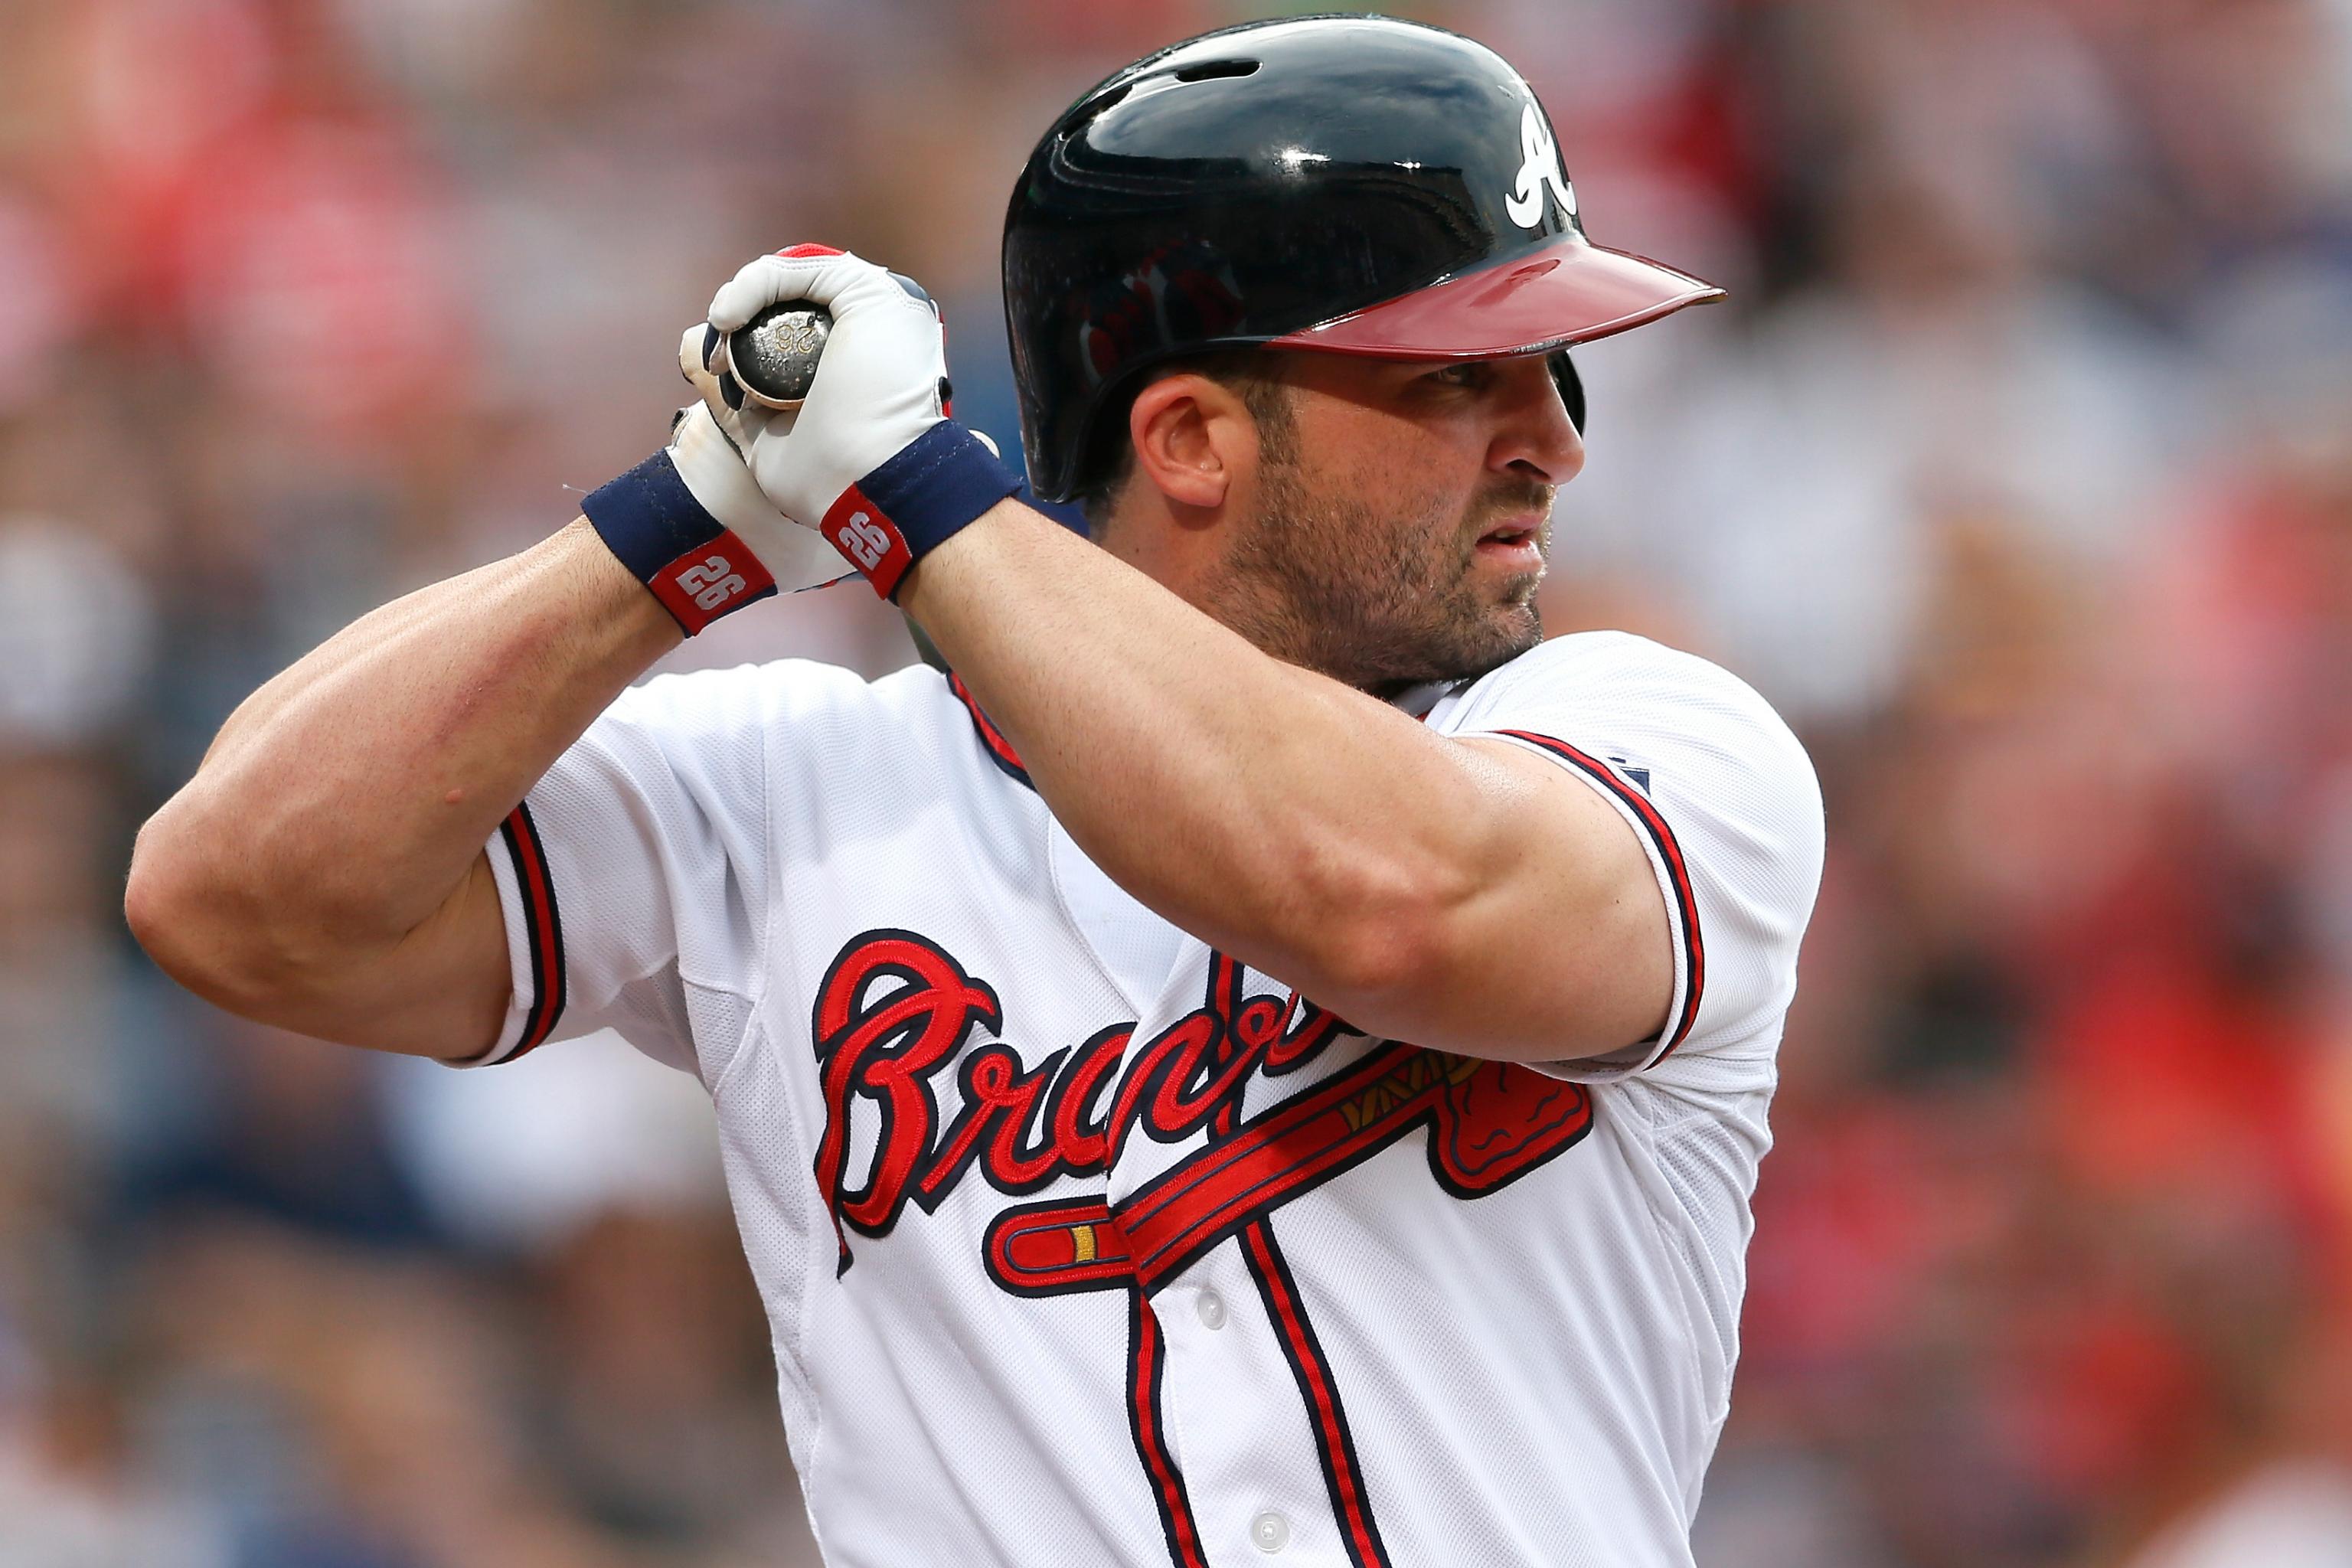 Atlanta Braves Fans of Braves Country - Dan Uggla's forearms and